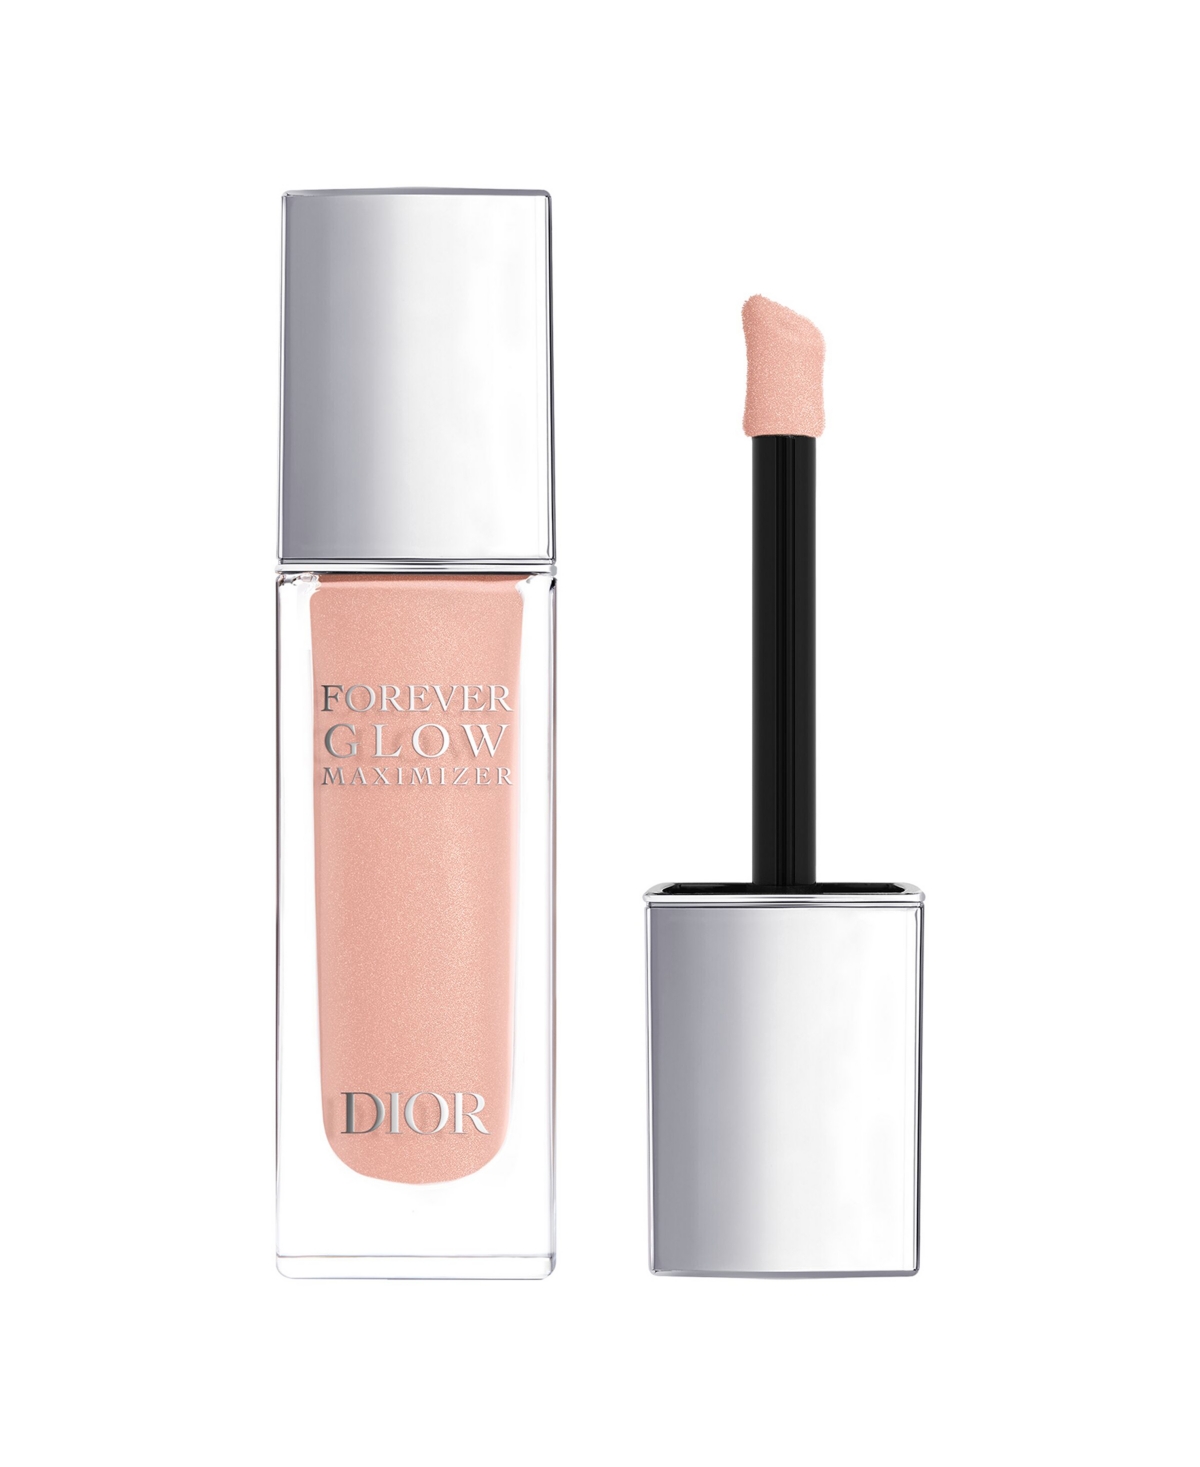 Dior Forever Glow Maximizer Longwear Liquid Highlighter In Nude - A Blush Nude